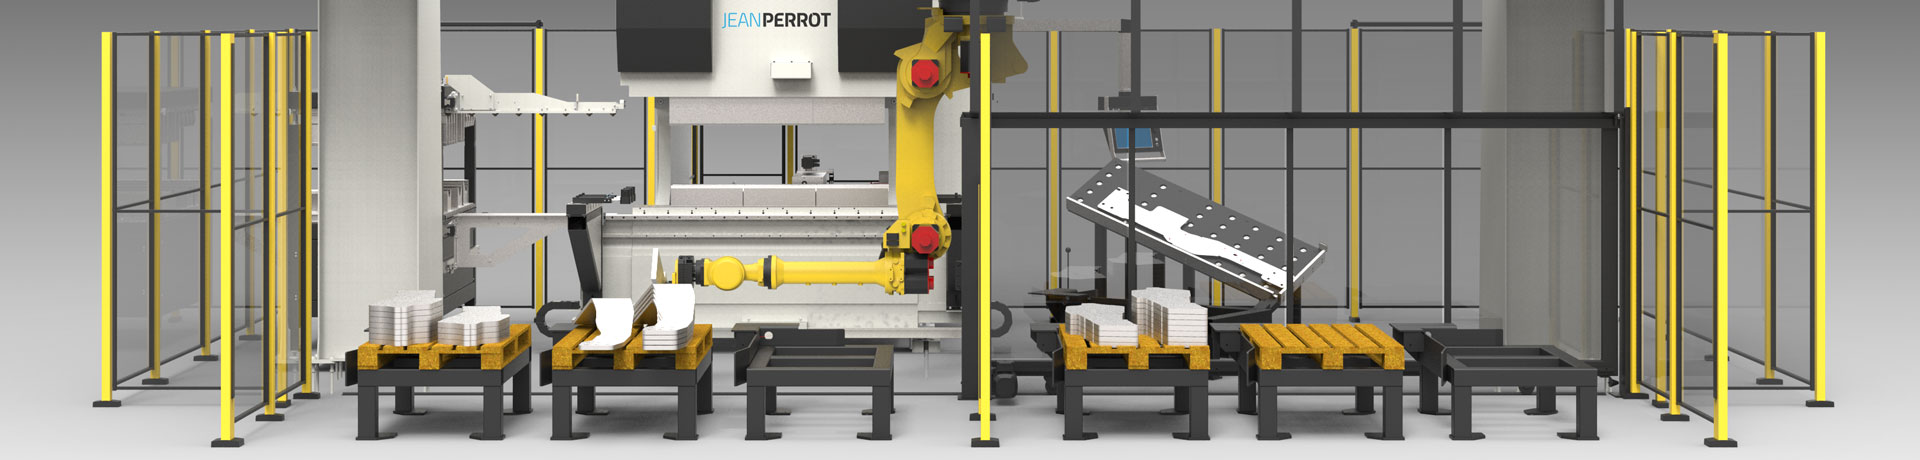 We offer custom solutions to answer each of our clients' specific needs. Our automated bending cellsinclude press brake MANEO Premium LCS, robotic arms, accessories & additional modules to fit your needs.